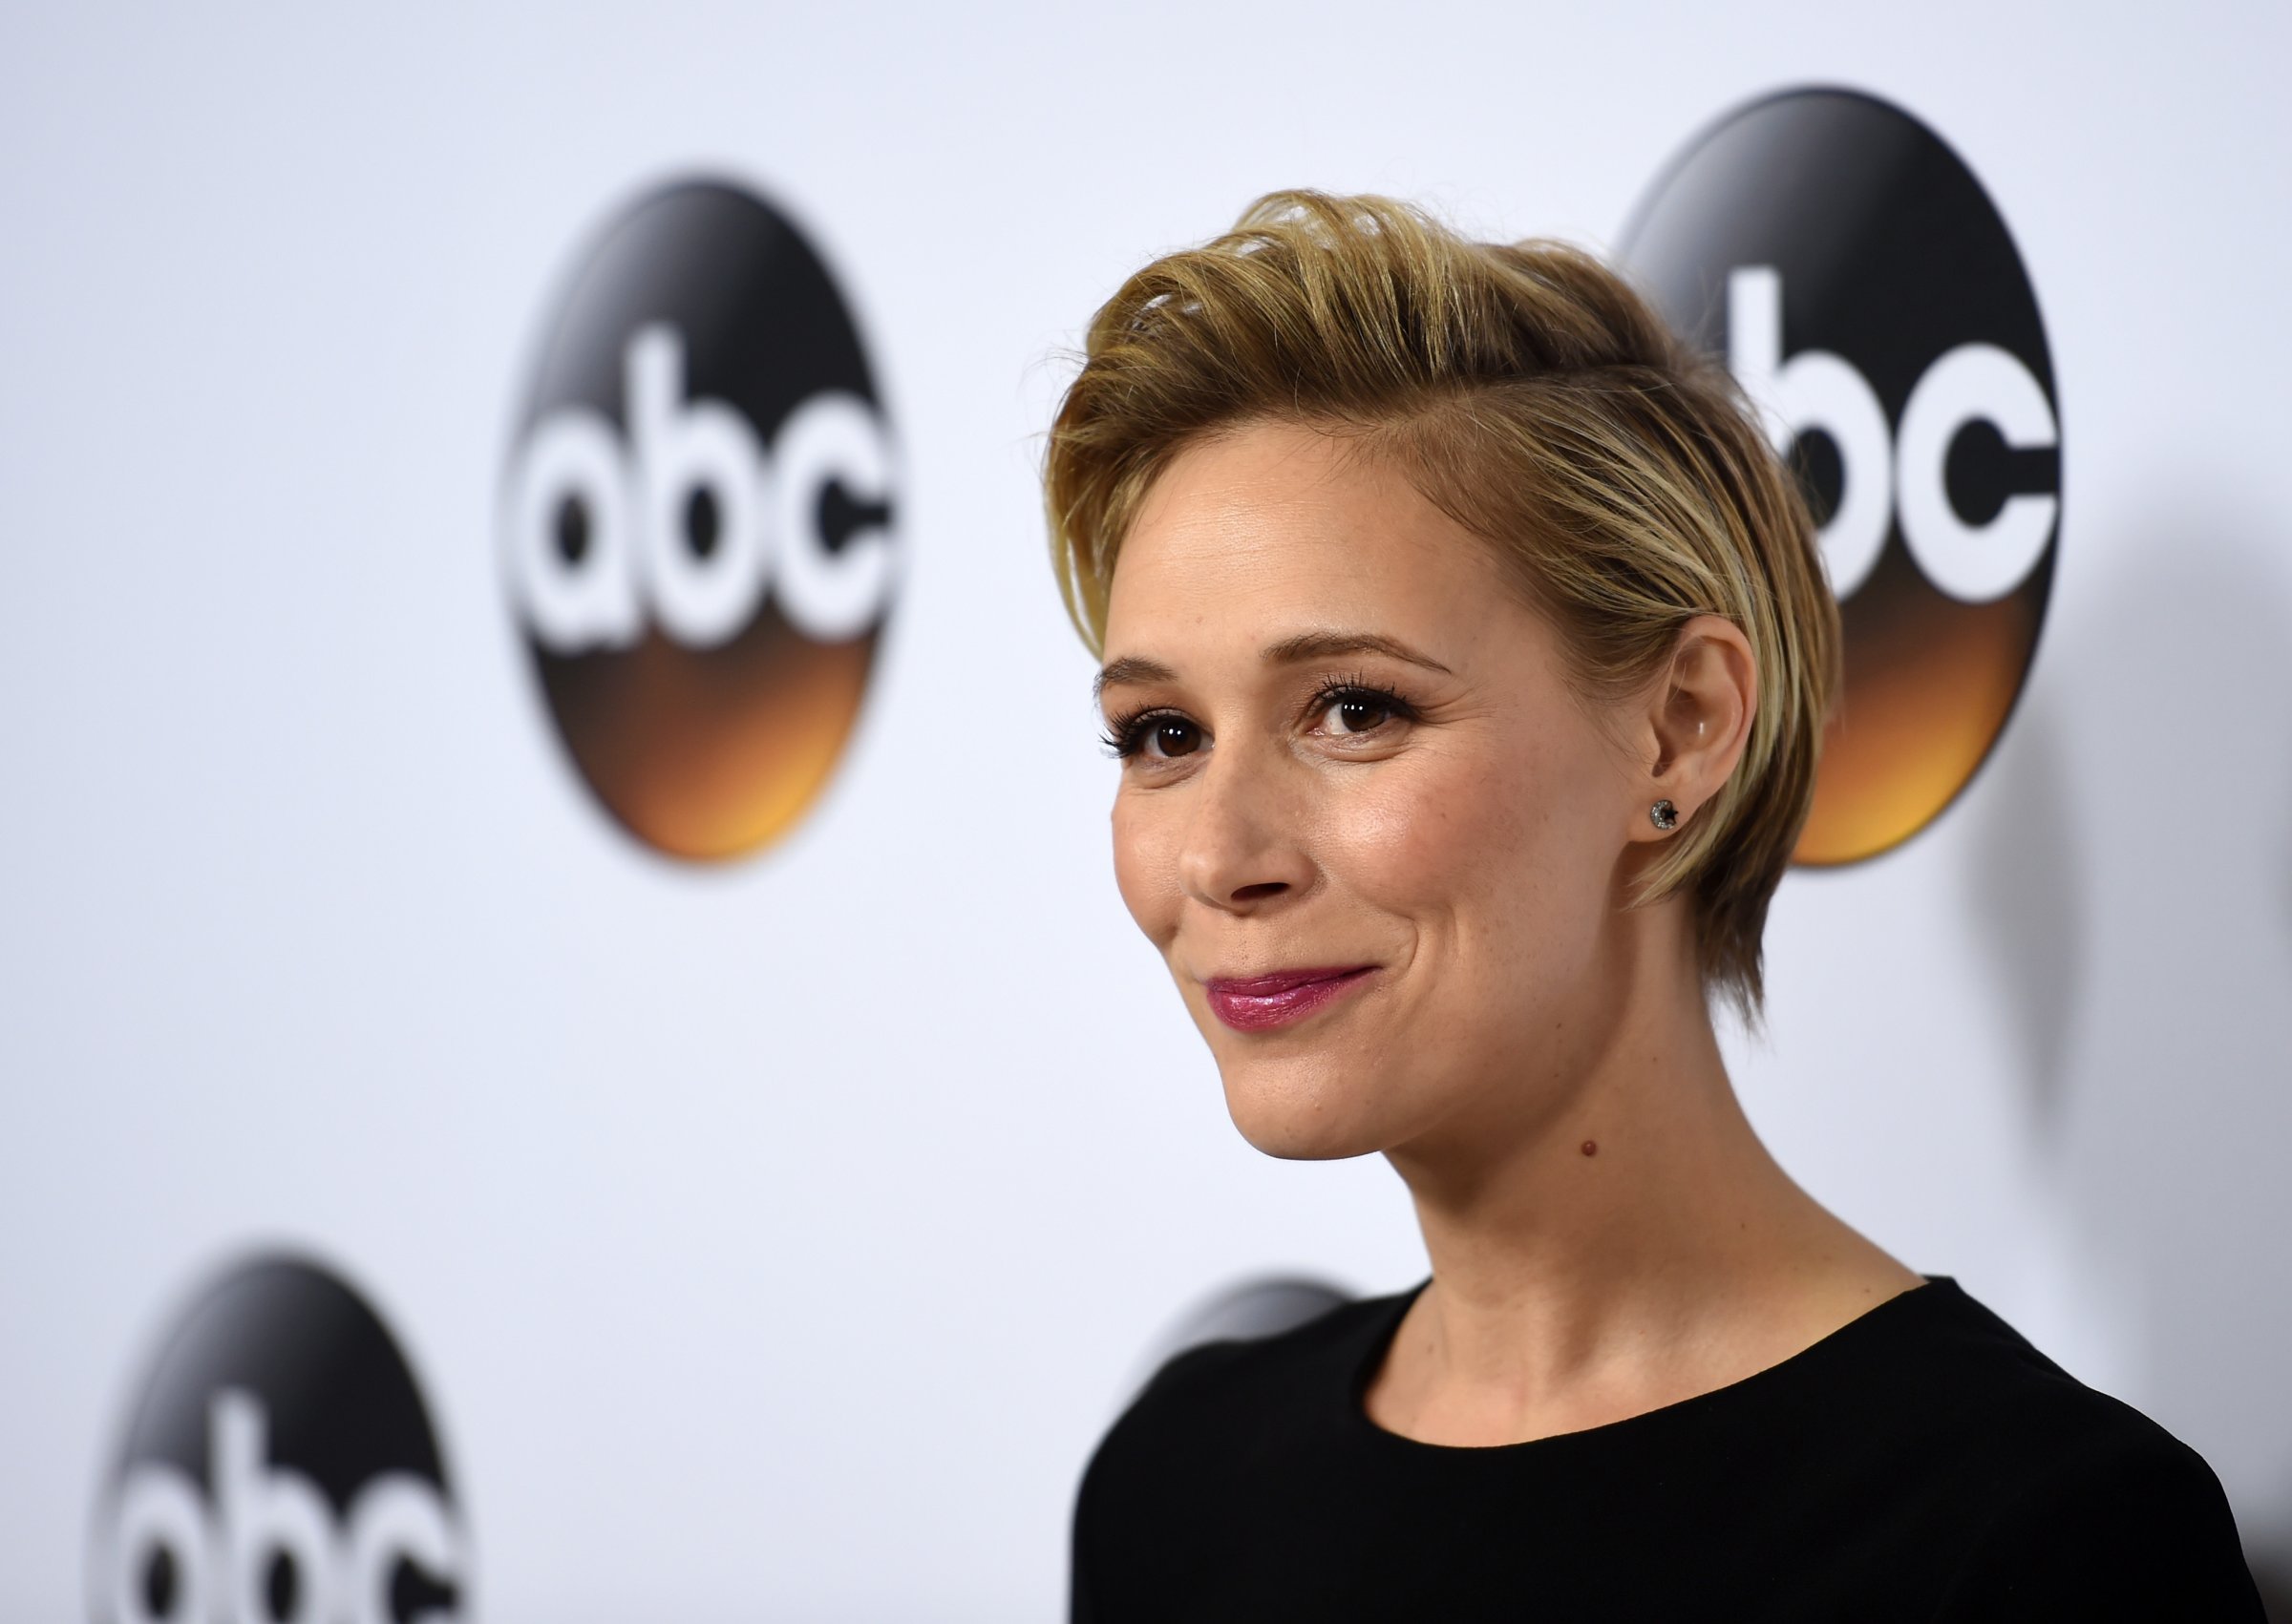 Actress Liza Weil arrives at the ABC TCA "Winter Press Tour 2015" Red Carpet on January 14, 2015 in Pasadena, California.